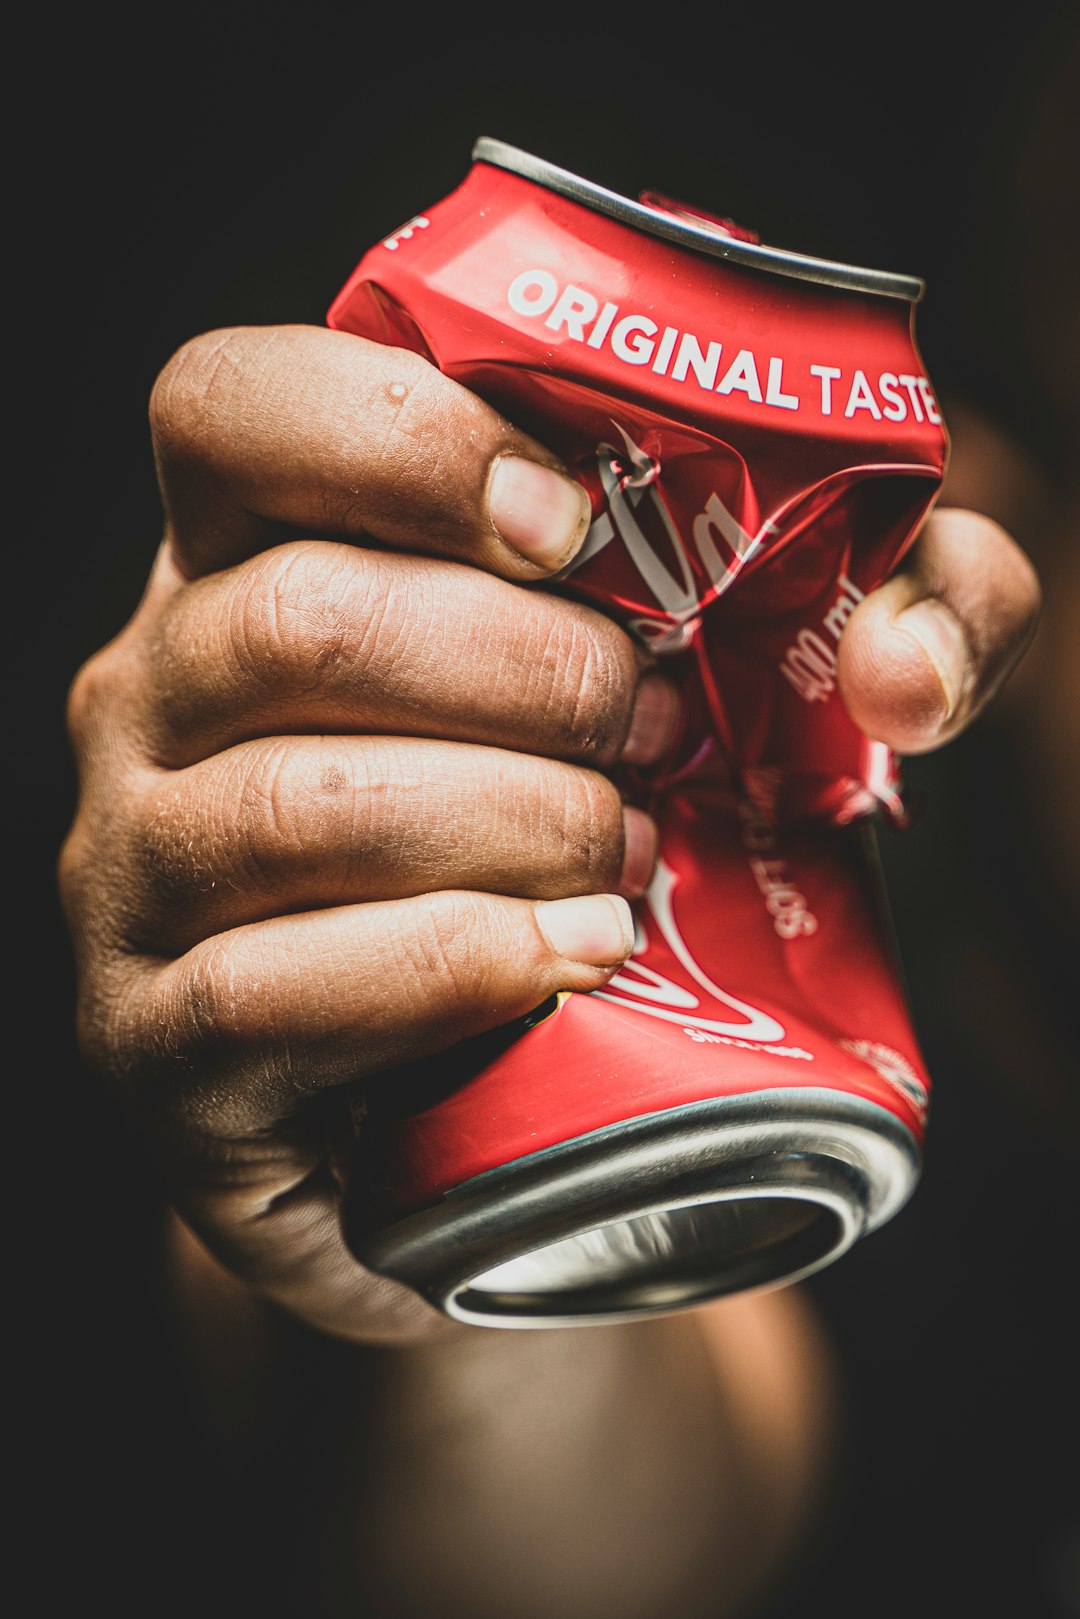 coca cola cherry can on persons hand